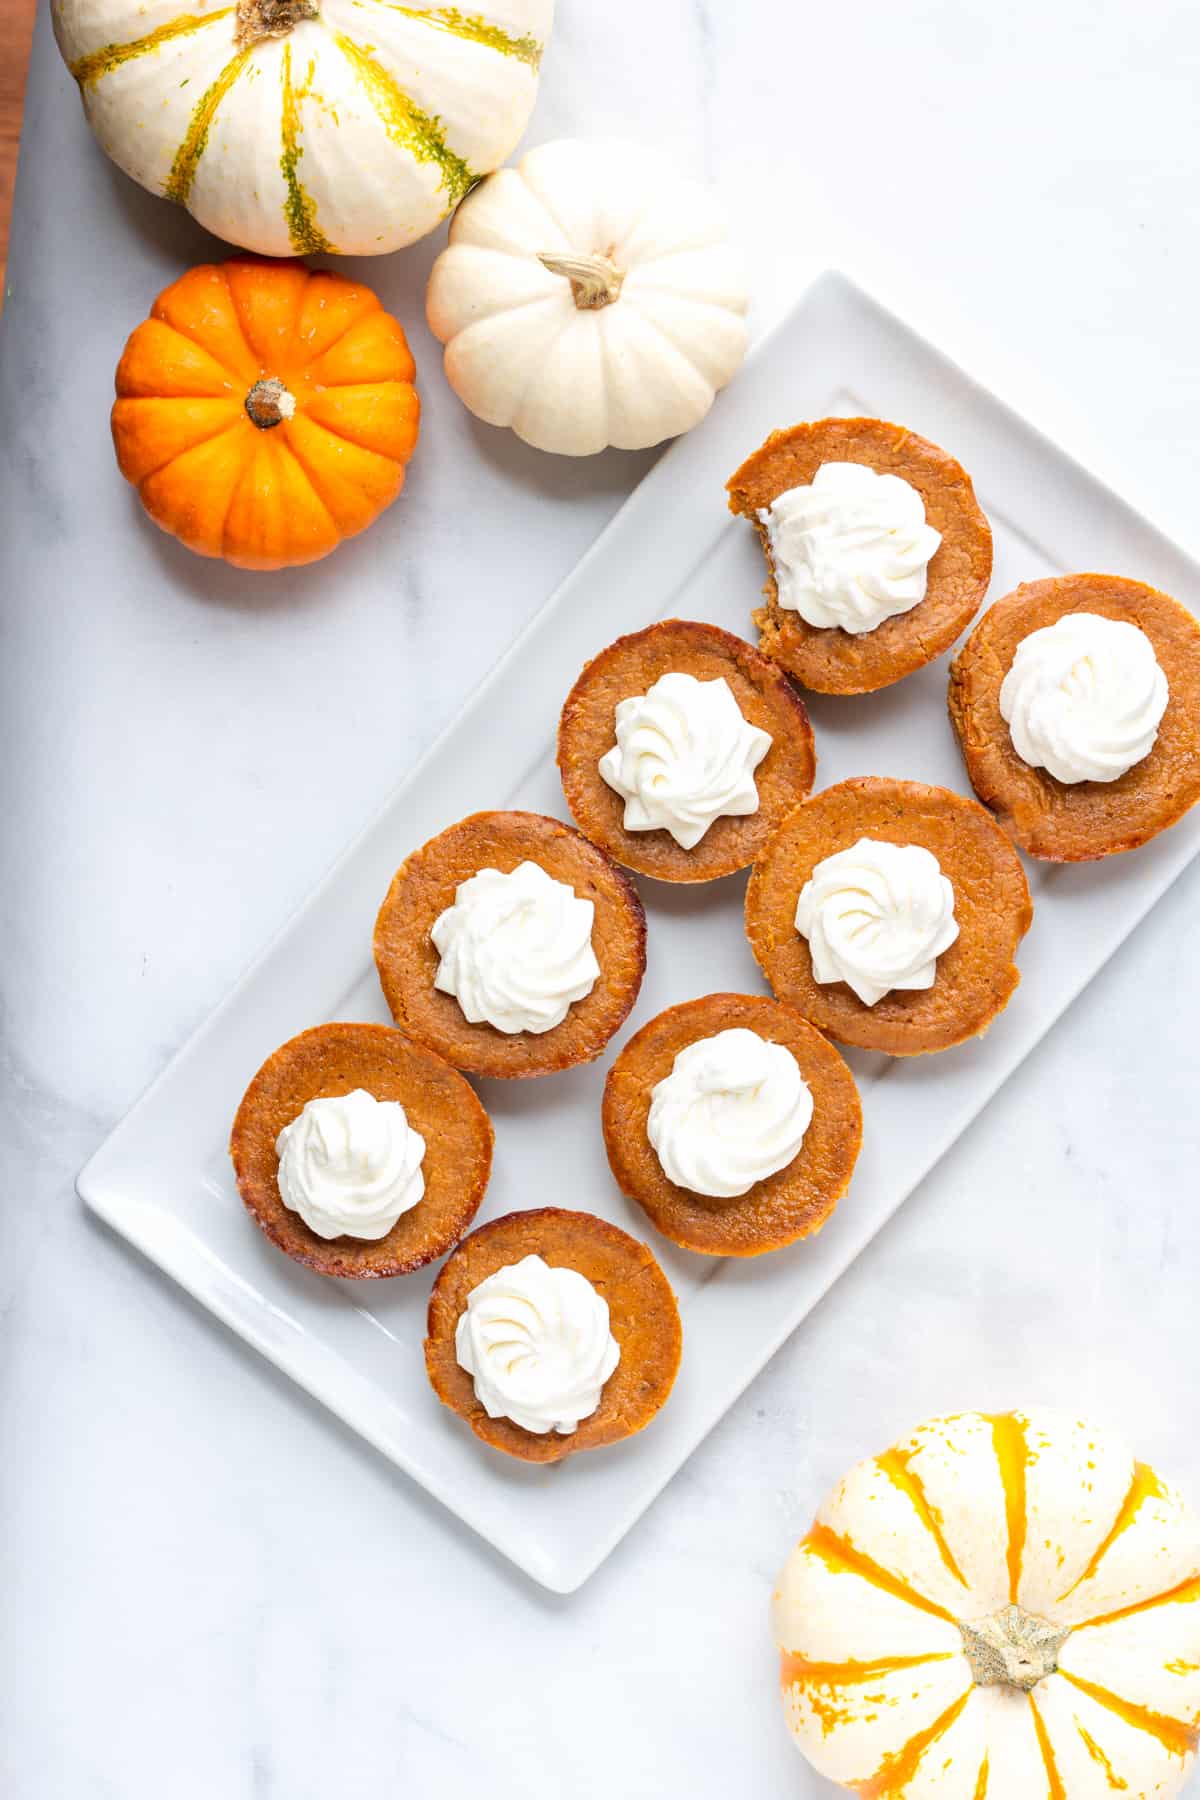 Pumpkin mini pies on a white plate surrounded by pumpkins.